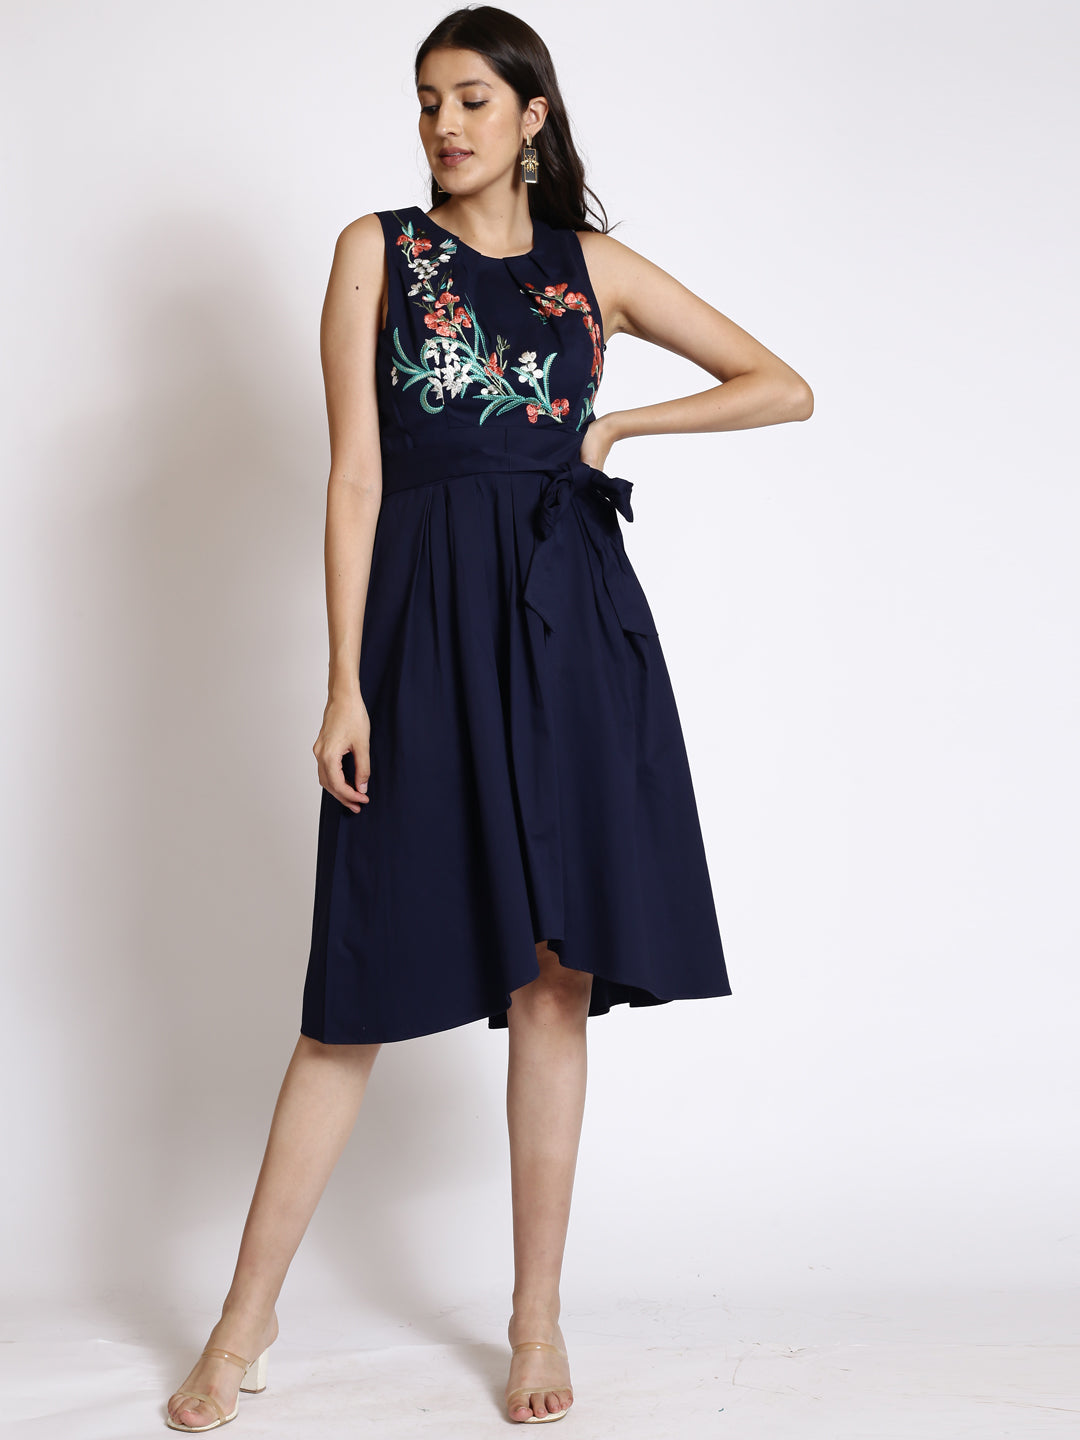 Embroidered Fit & Flare Dress